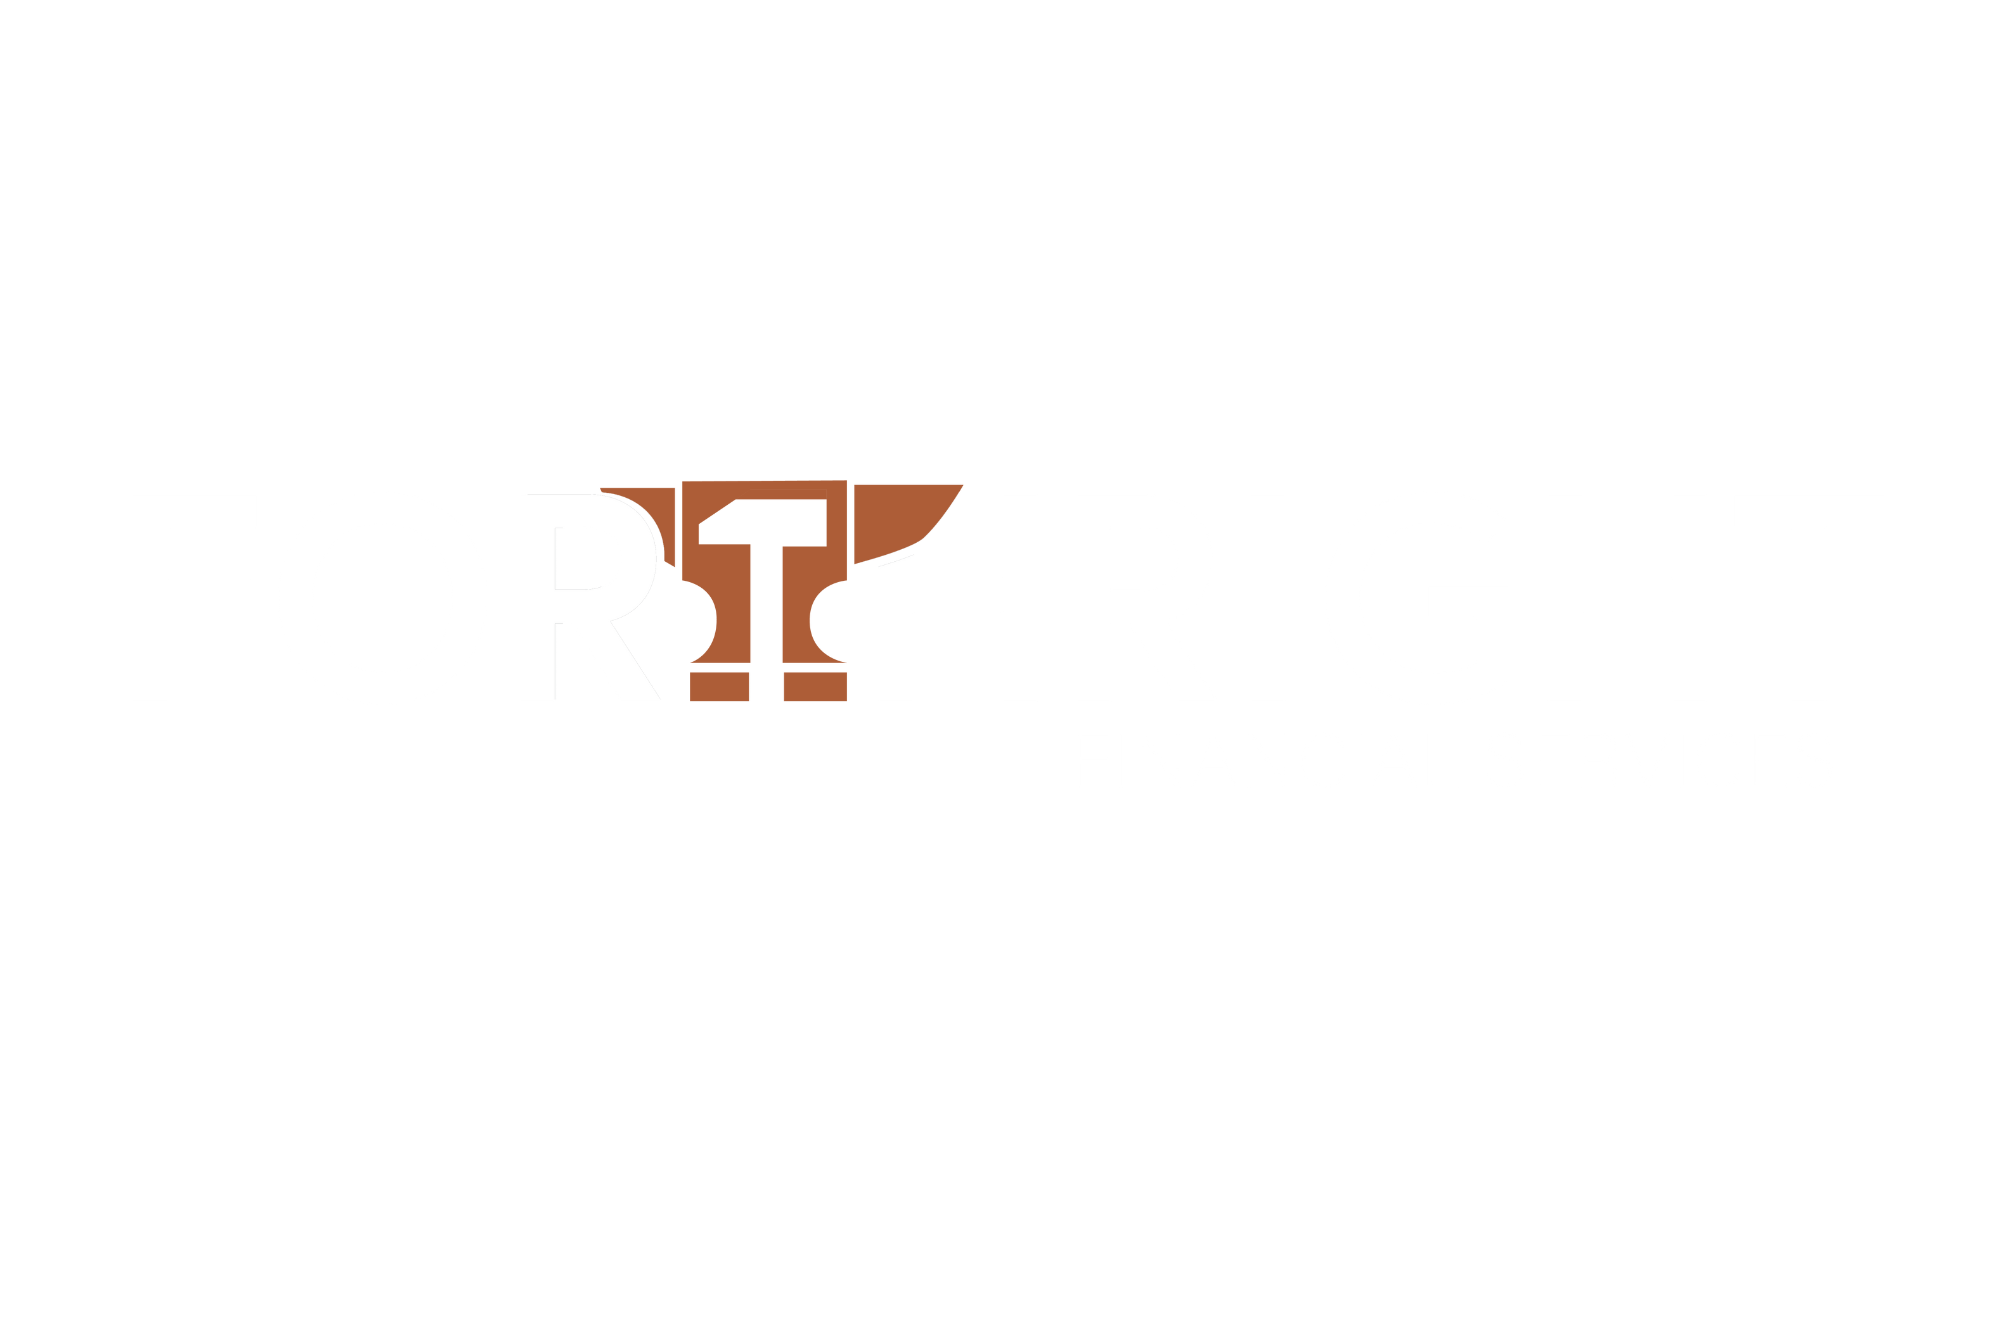 Forthright Financial Services 